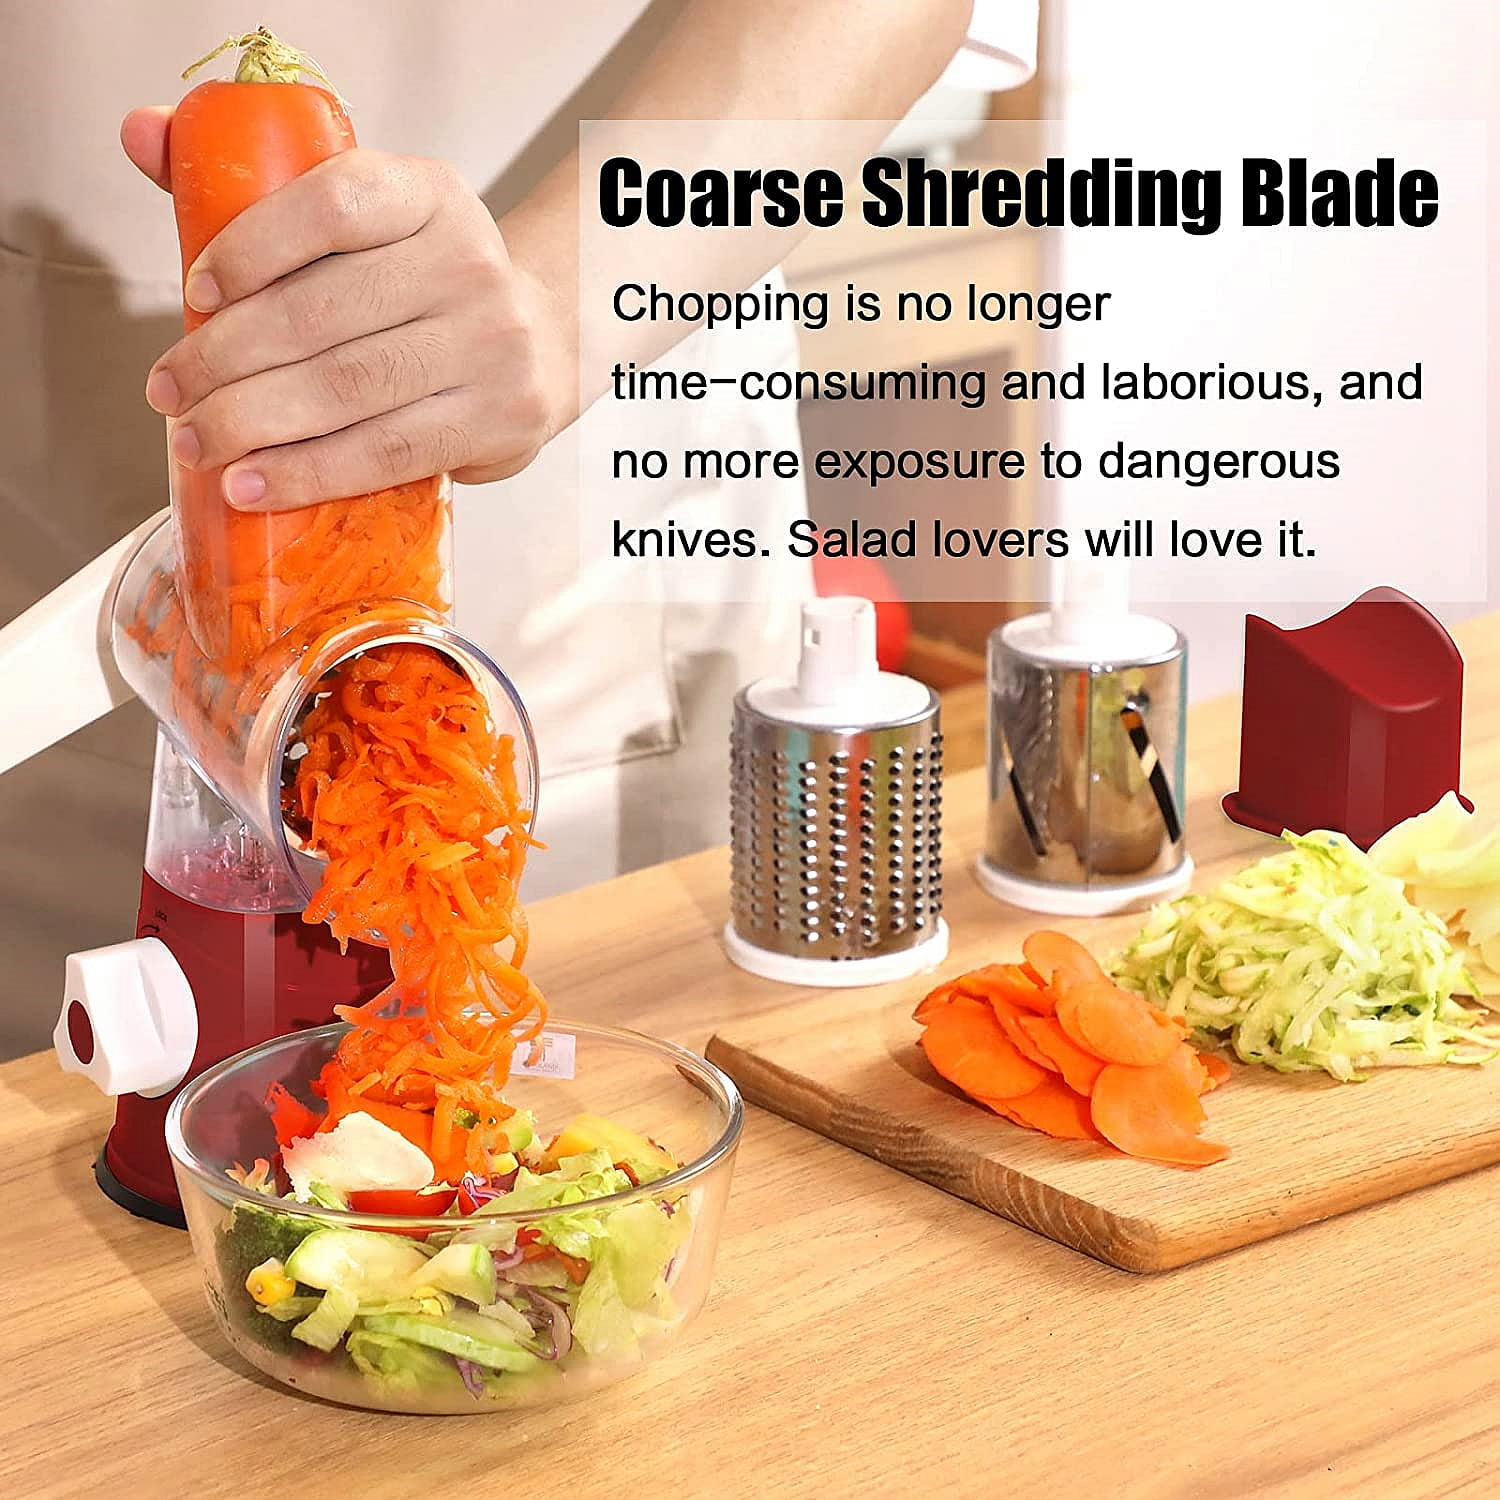 1111fourone Cheese Grater Stainless Gadget Fruit Vegetable Carrot Shredders Fruit Potato Carrot Grater Kitchen Accessories, As Shown